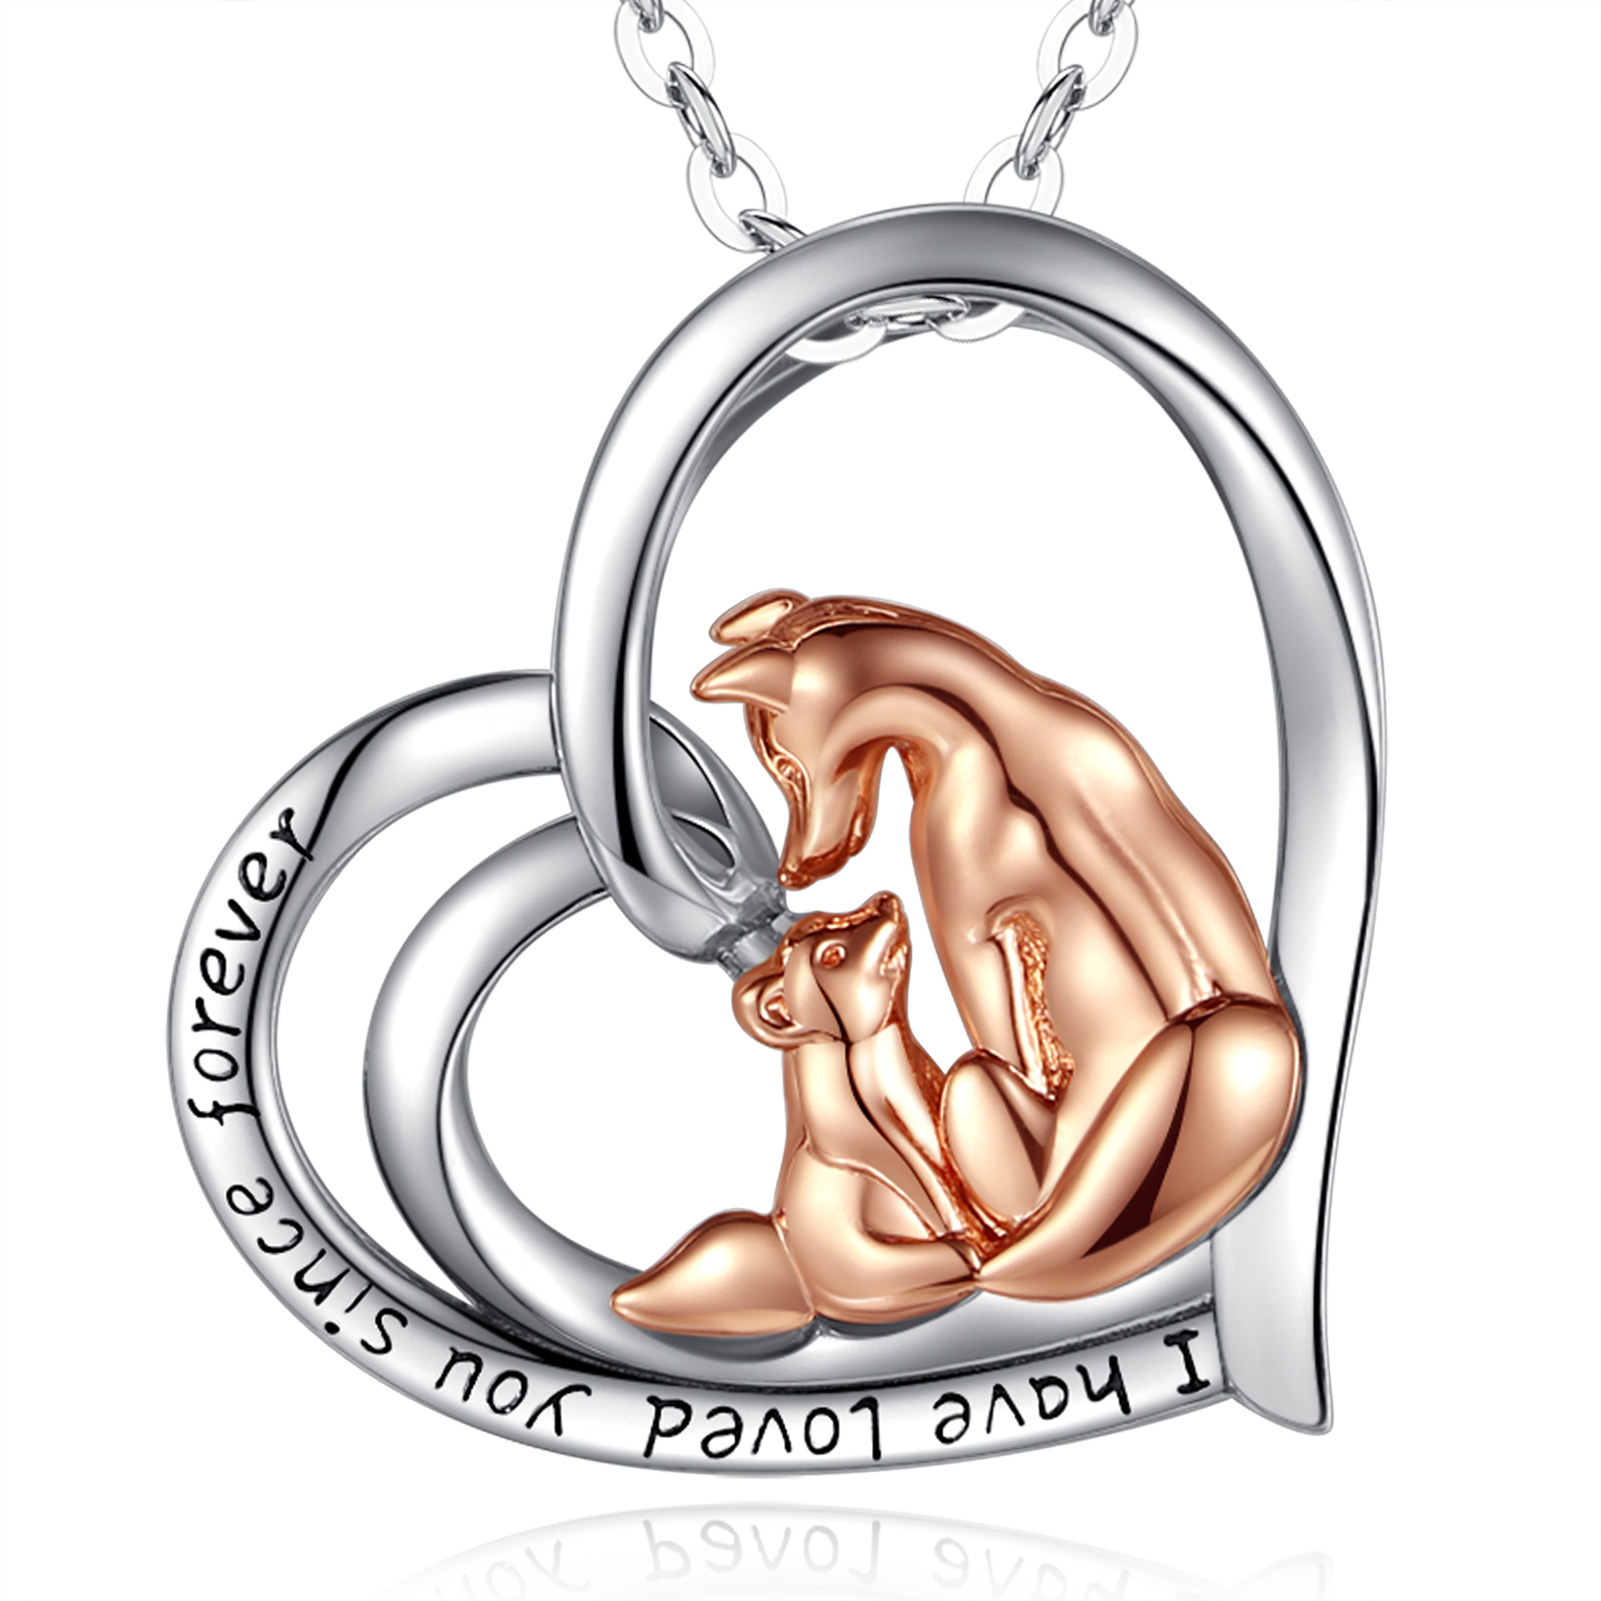 Merryshine Jewelry High Quality S925 Sterling Silver Fox Mother and Baby Heart Pendant Necklace